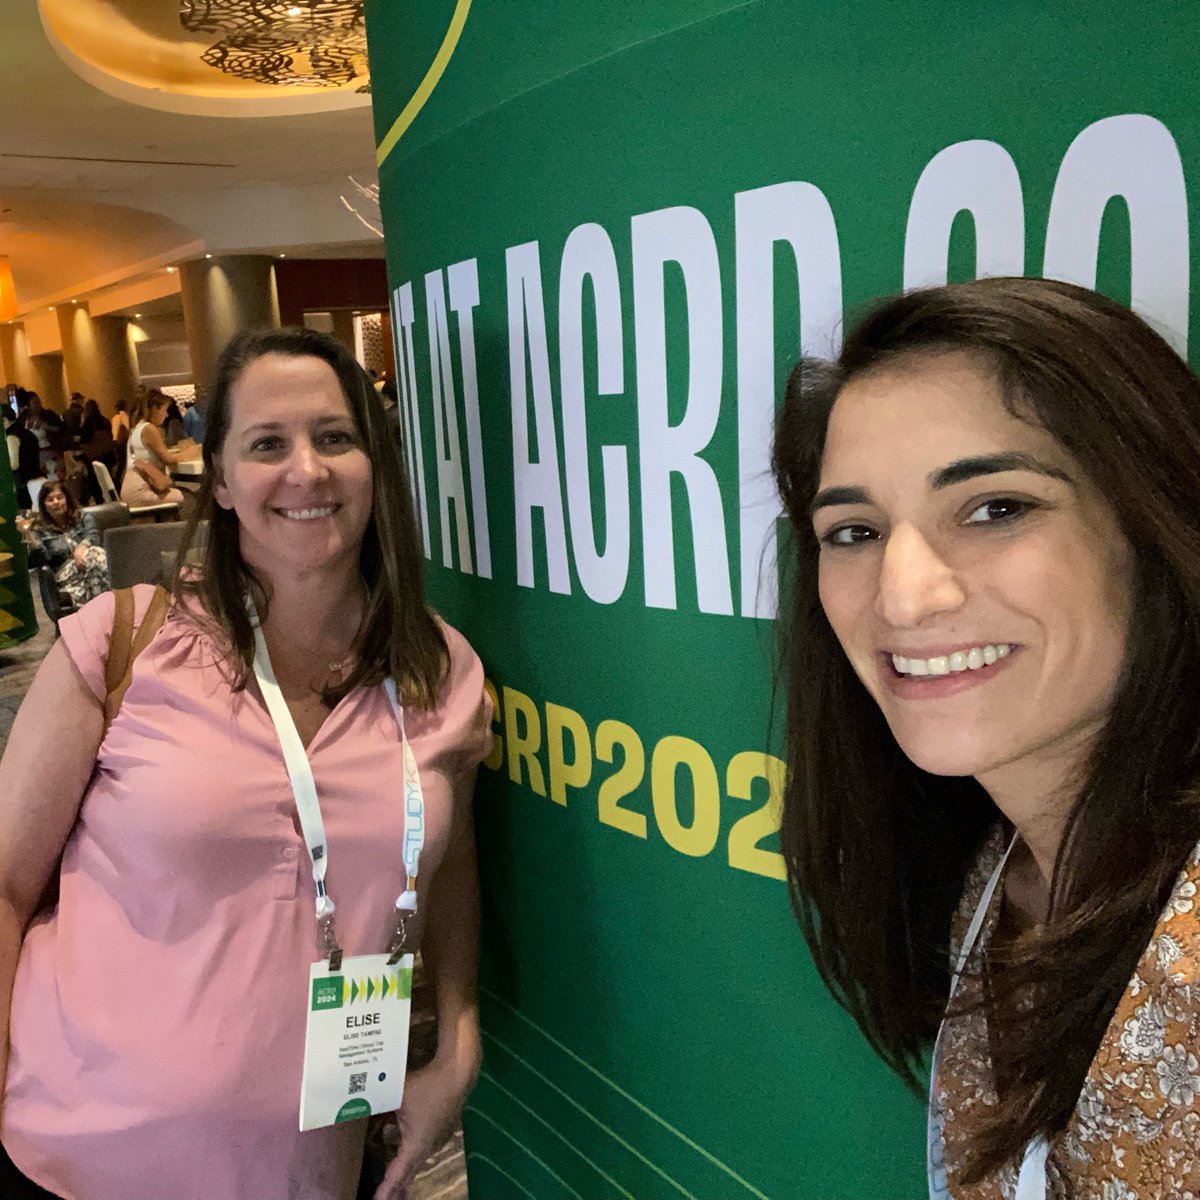 That’s a wrap! Thanks to ACRP - Association of Clinical Research Professionals for another amazing conference experience and the opportunity to connect with our customers and colleagues in the clinical research community!  #ClinicalResearch #eClinicalSolutions #ACRP2024